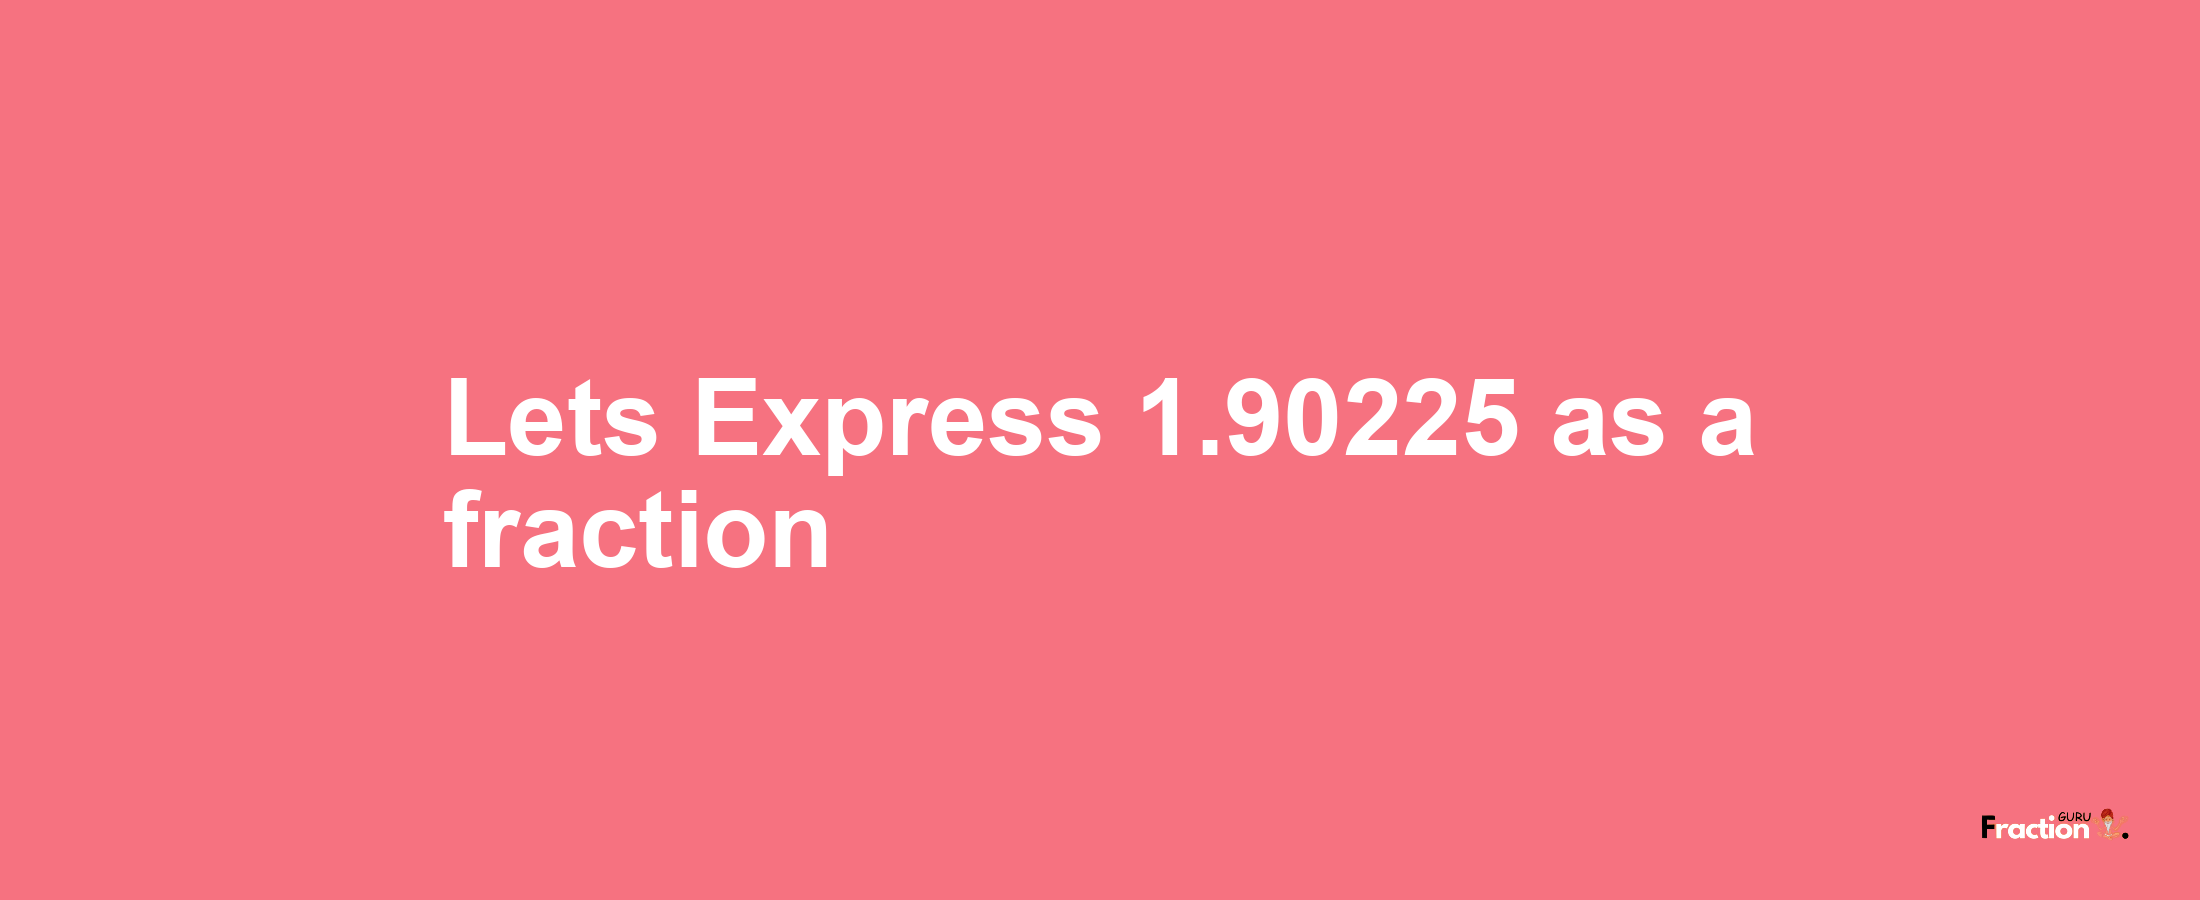 Lets Express 1.90225 as afraction